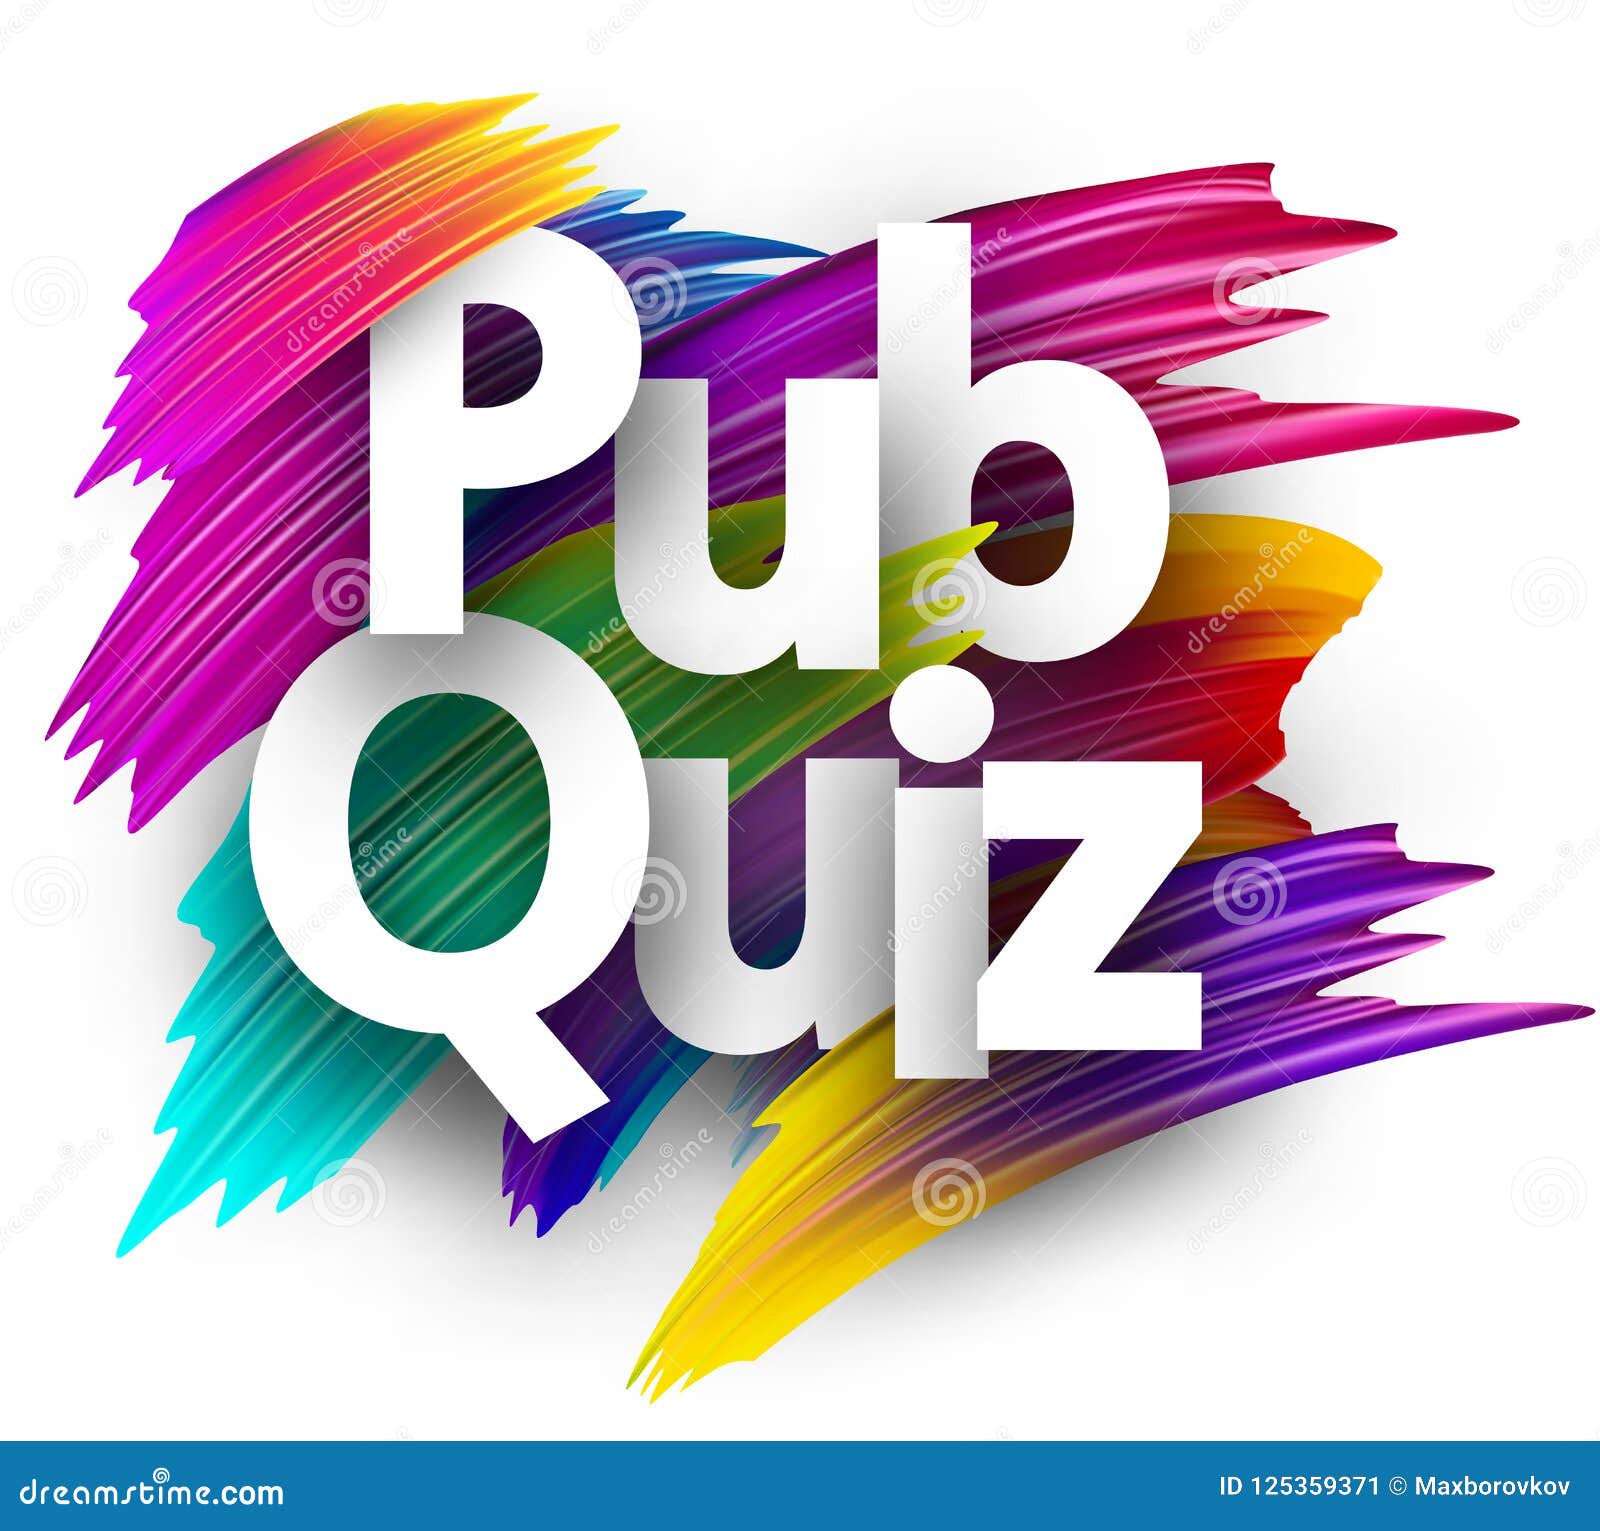 pub quiz card with colorful brush strokes.